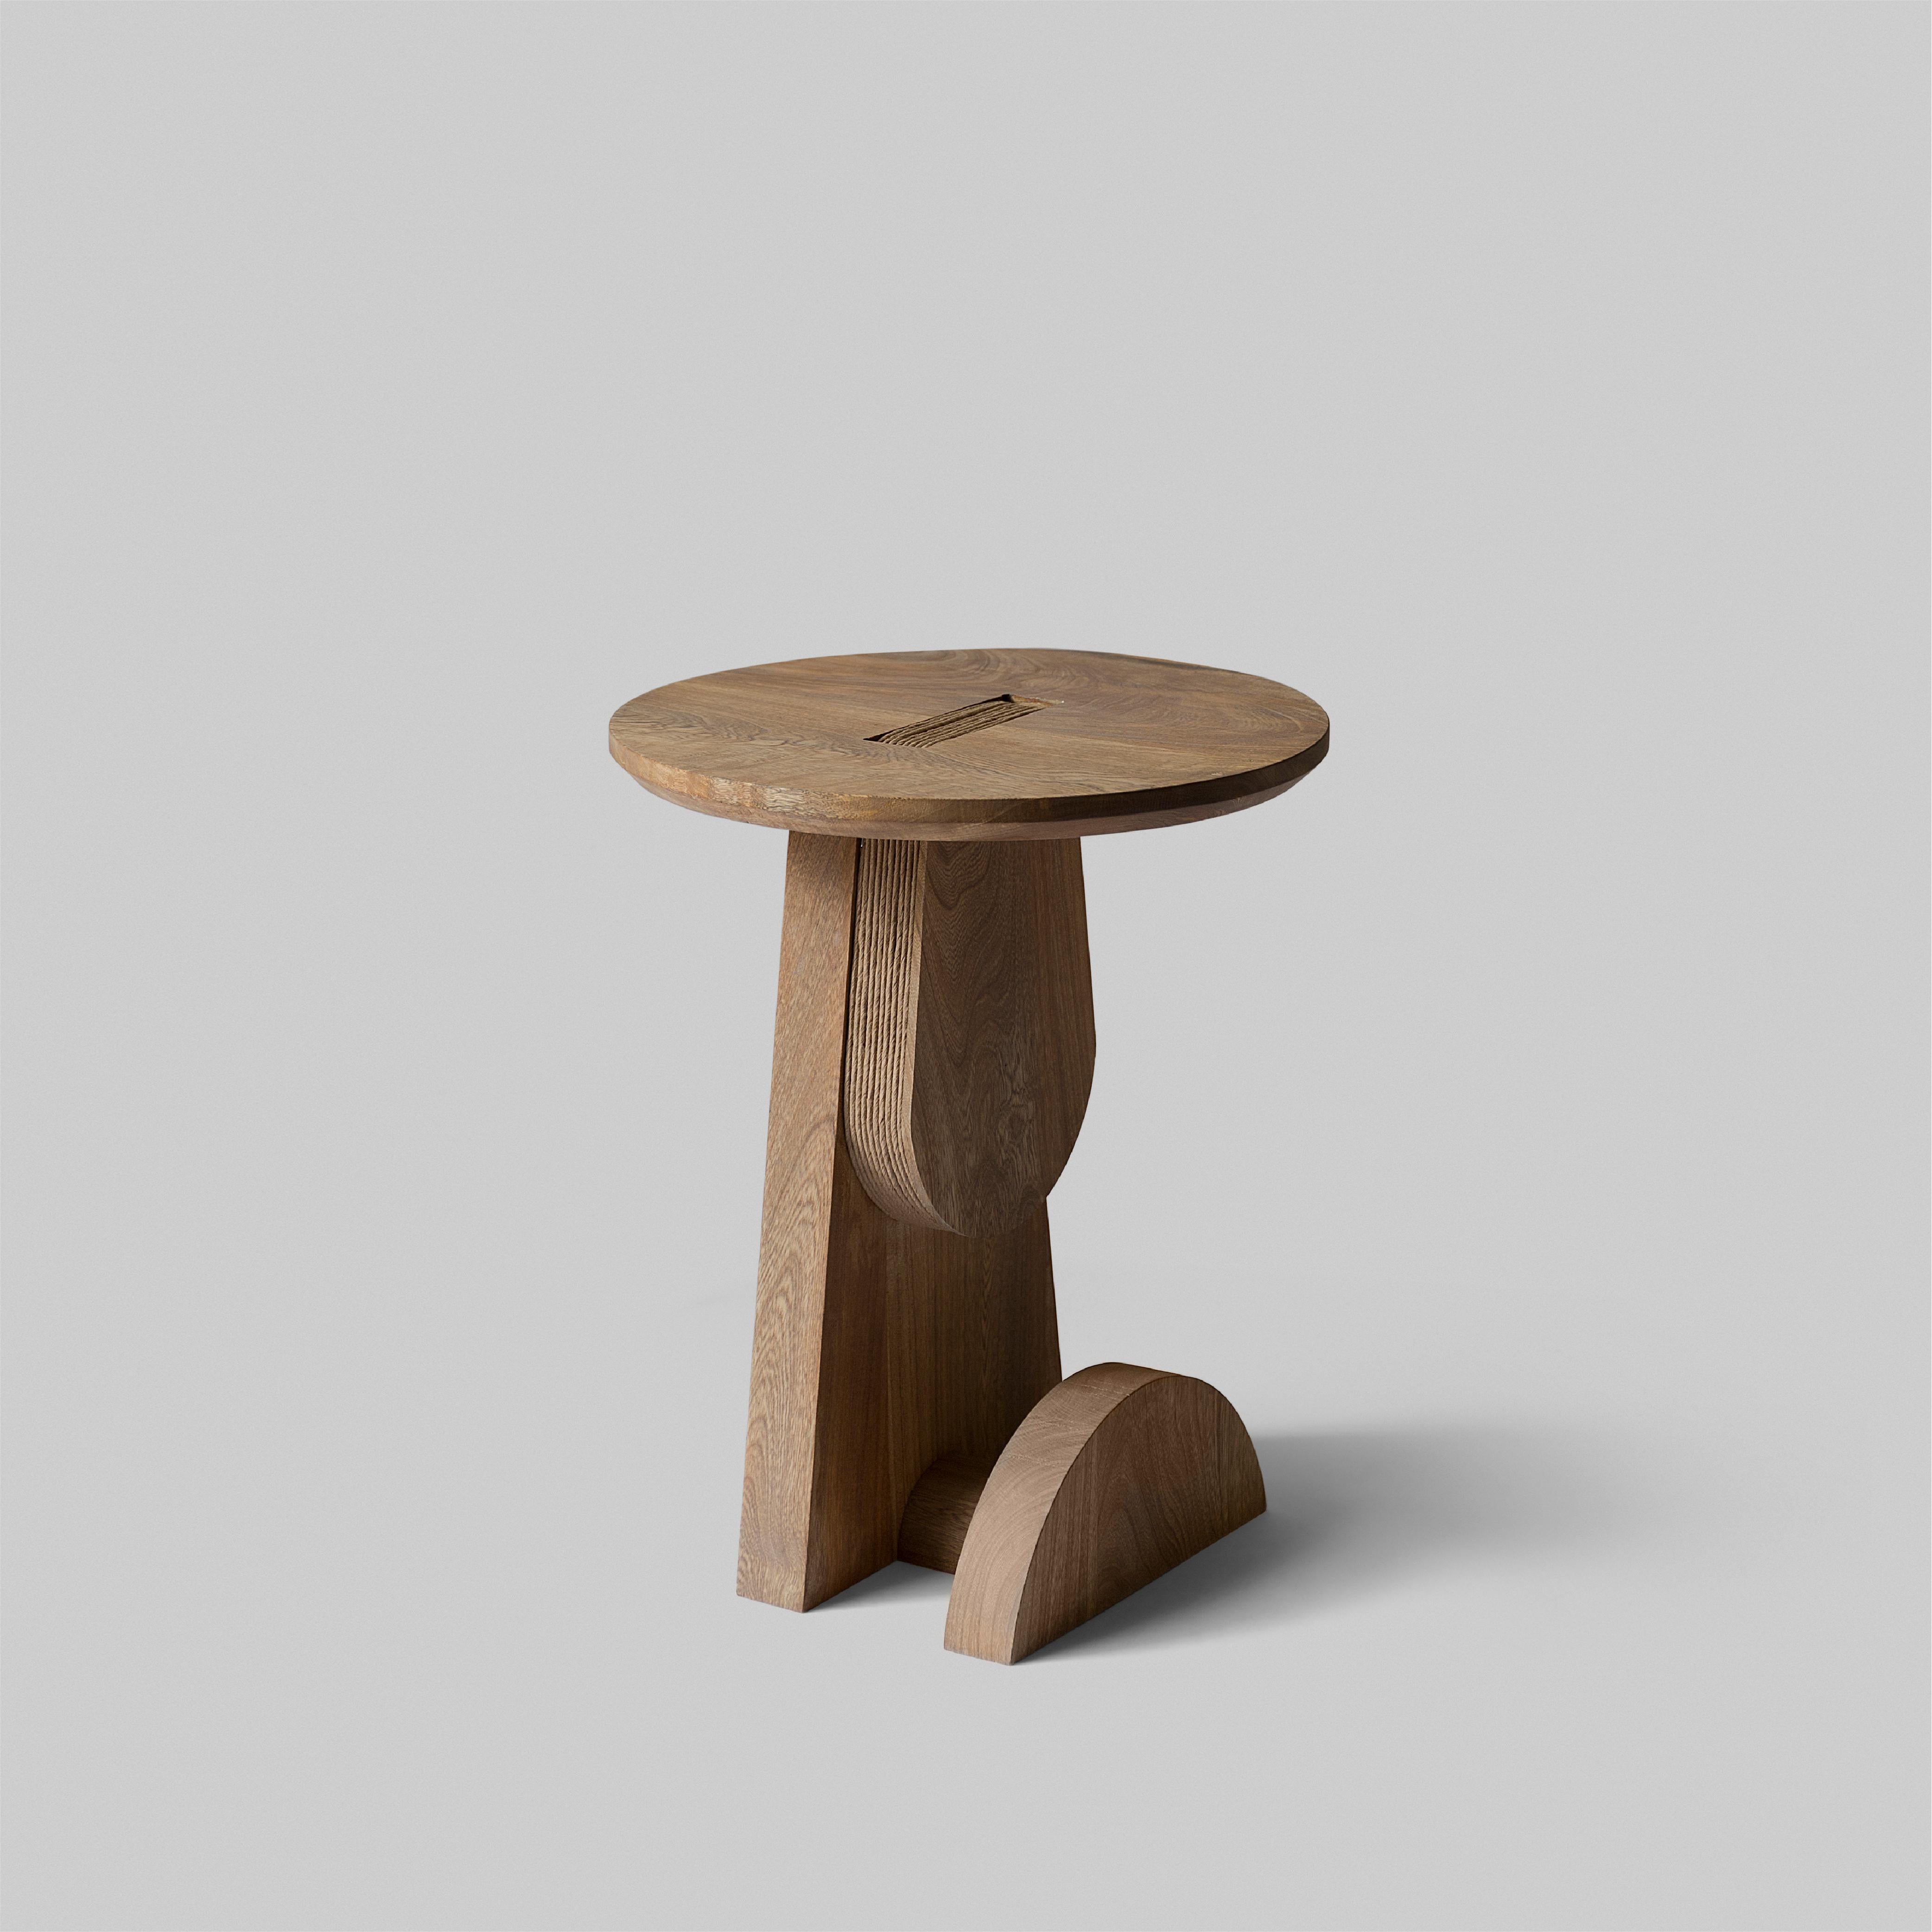 Mexican Basurto 03 Contemporary Wooden Stool with Leather details For Sale